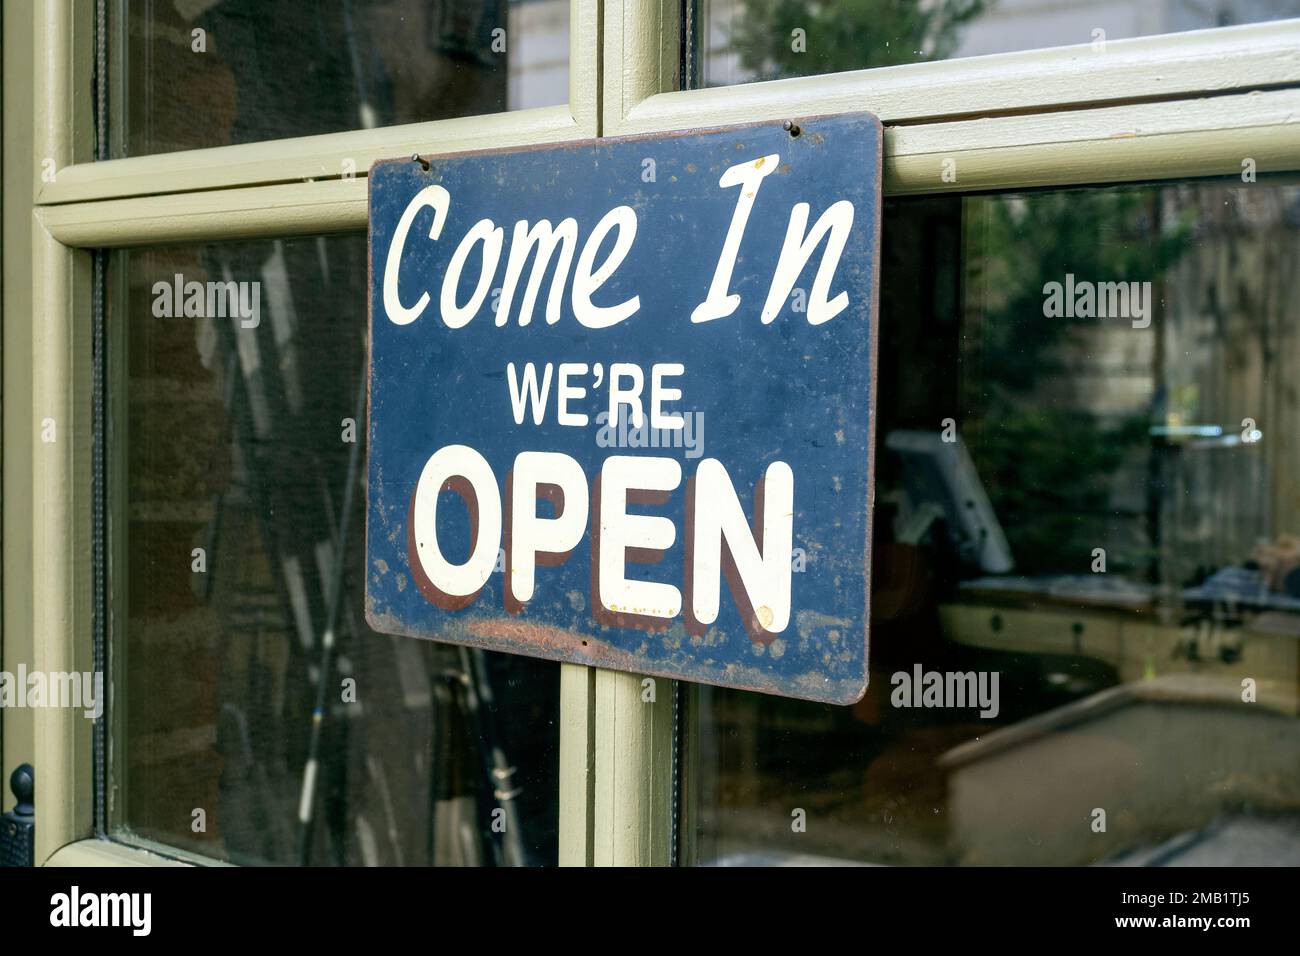 Come in we are open - text on a sign board of cafe Stock Photo